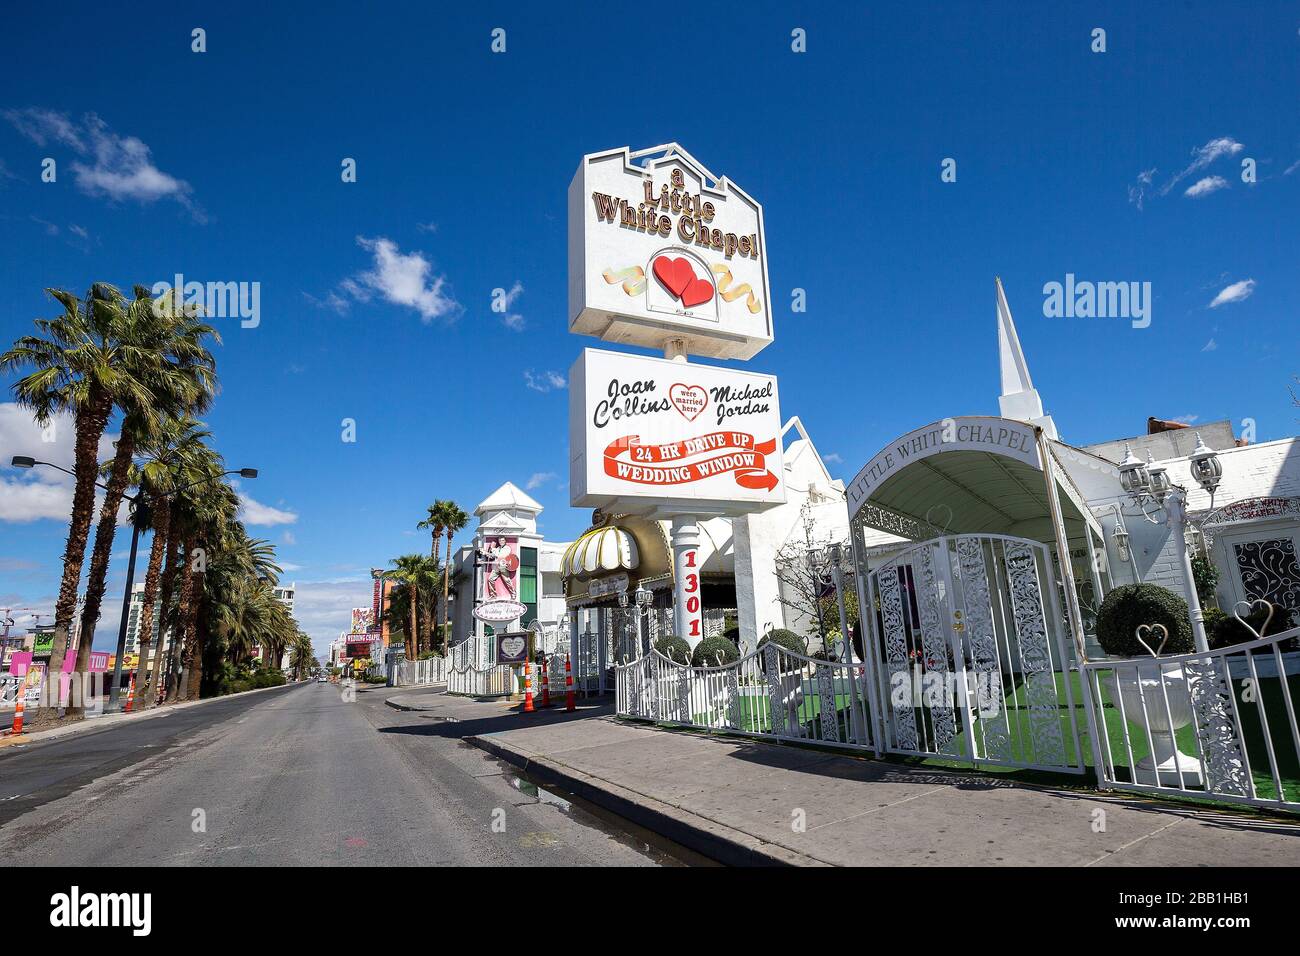 General view of A Little White Chapel amid the global coronavirus COVID-19 pandemic, Monday, March 23, 2020, in Las Vegas. (Photo by IOS/Espa-Images) Stock Photo